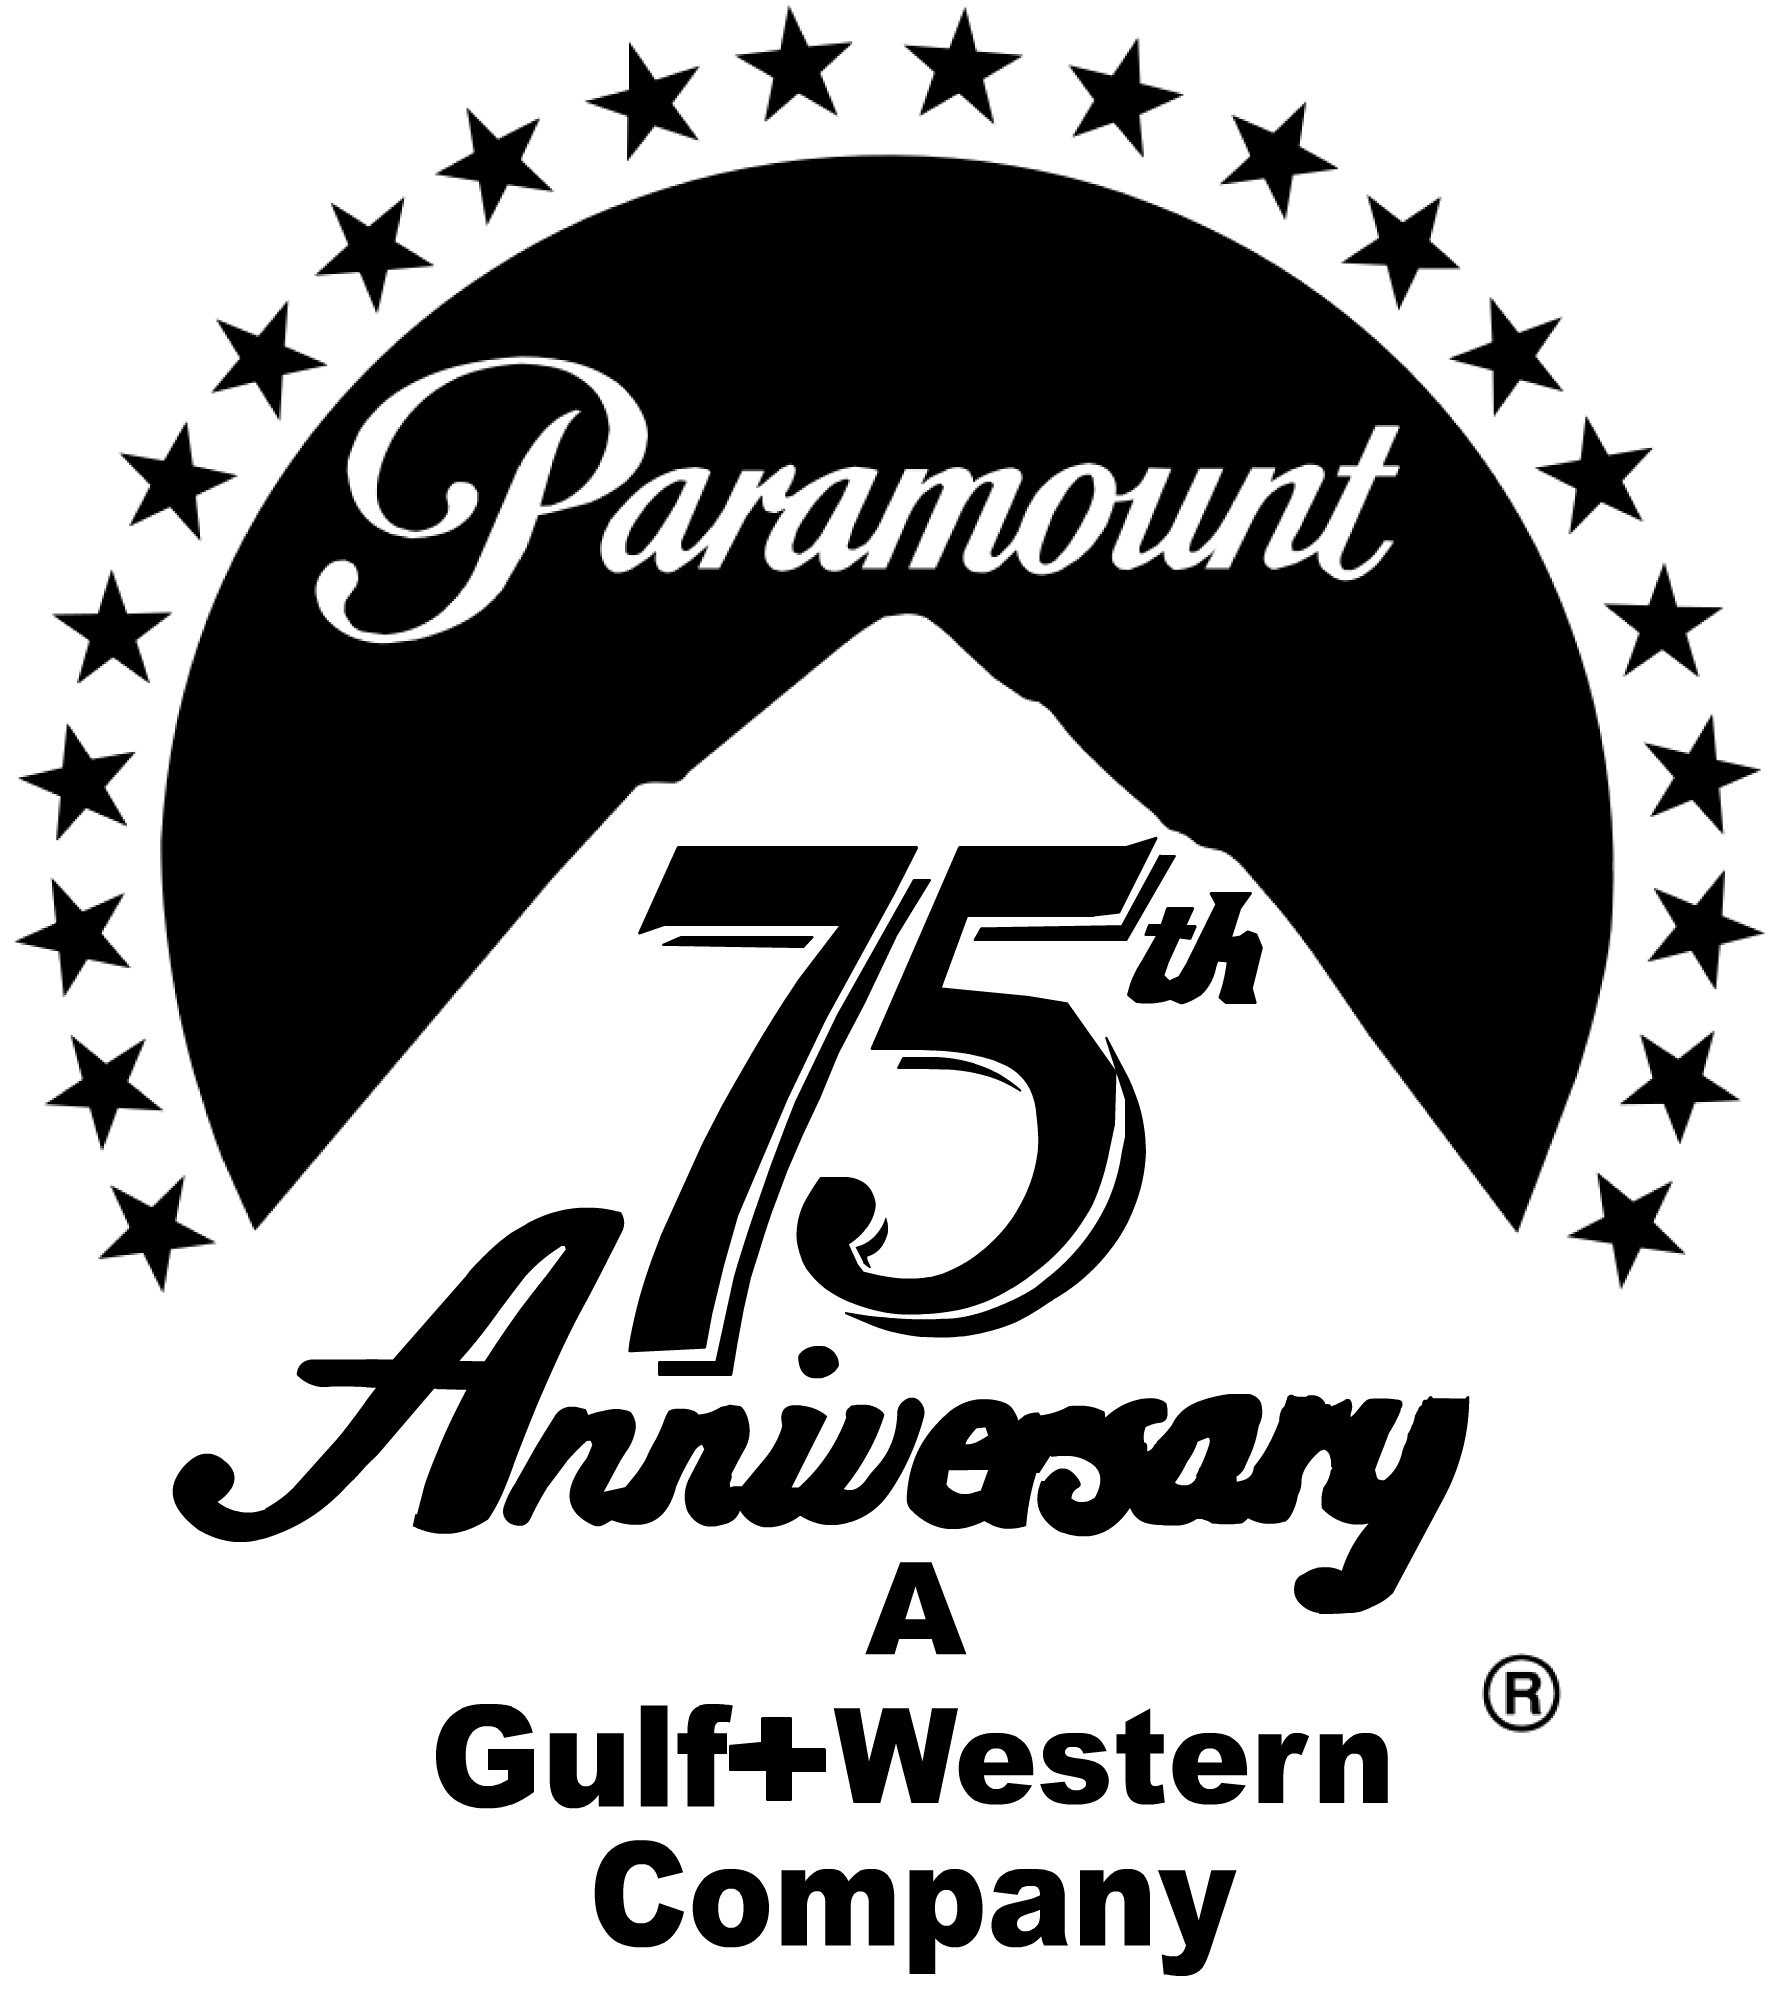 Paramount Company Logo - Paramount Picture 75th Anniversary.png